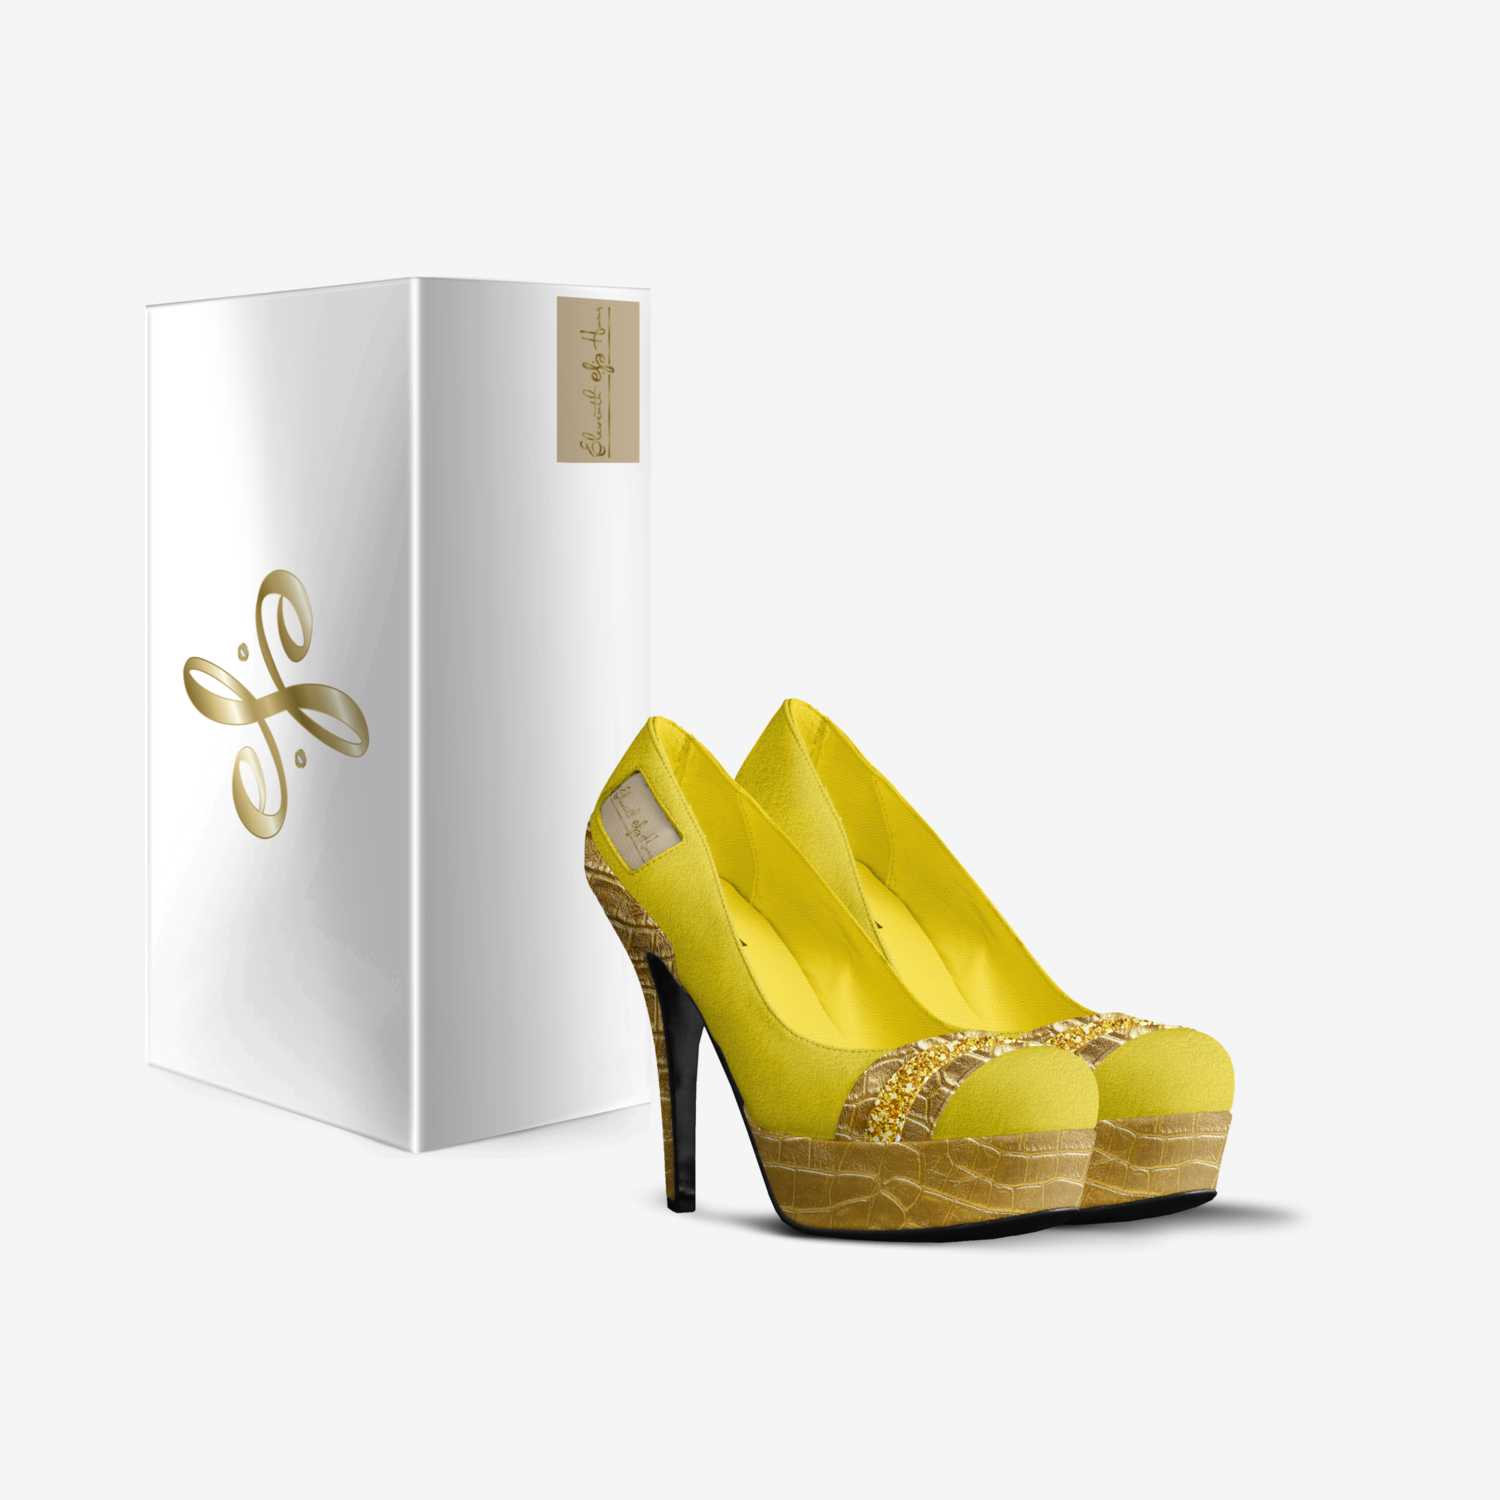 Eleventh Hour custom made in Italy shoes by Elvira Camacho-hernandez | Box view